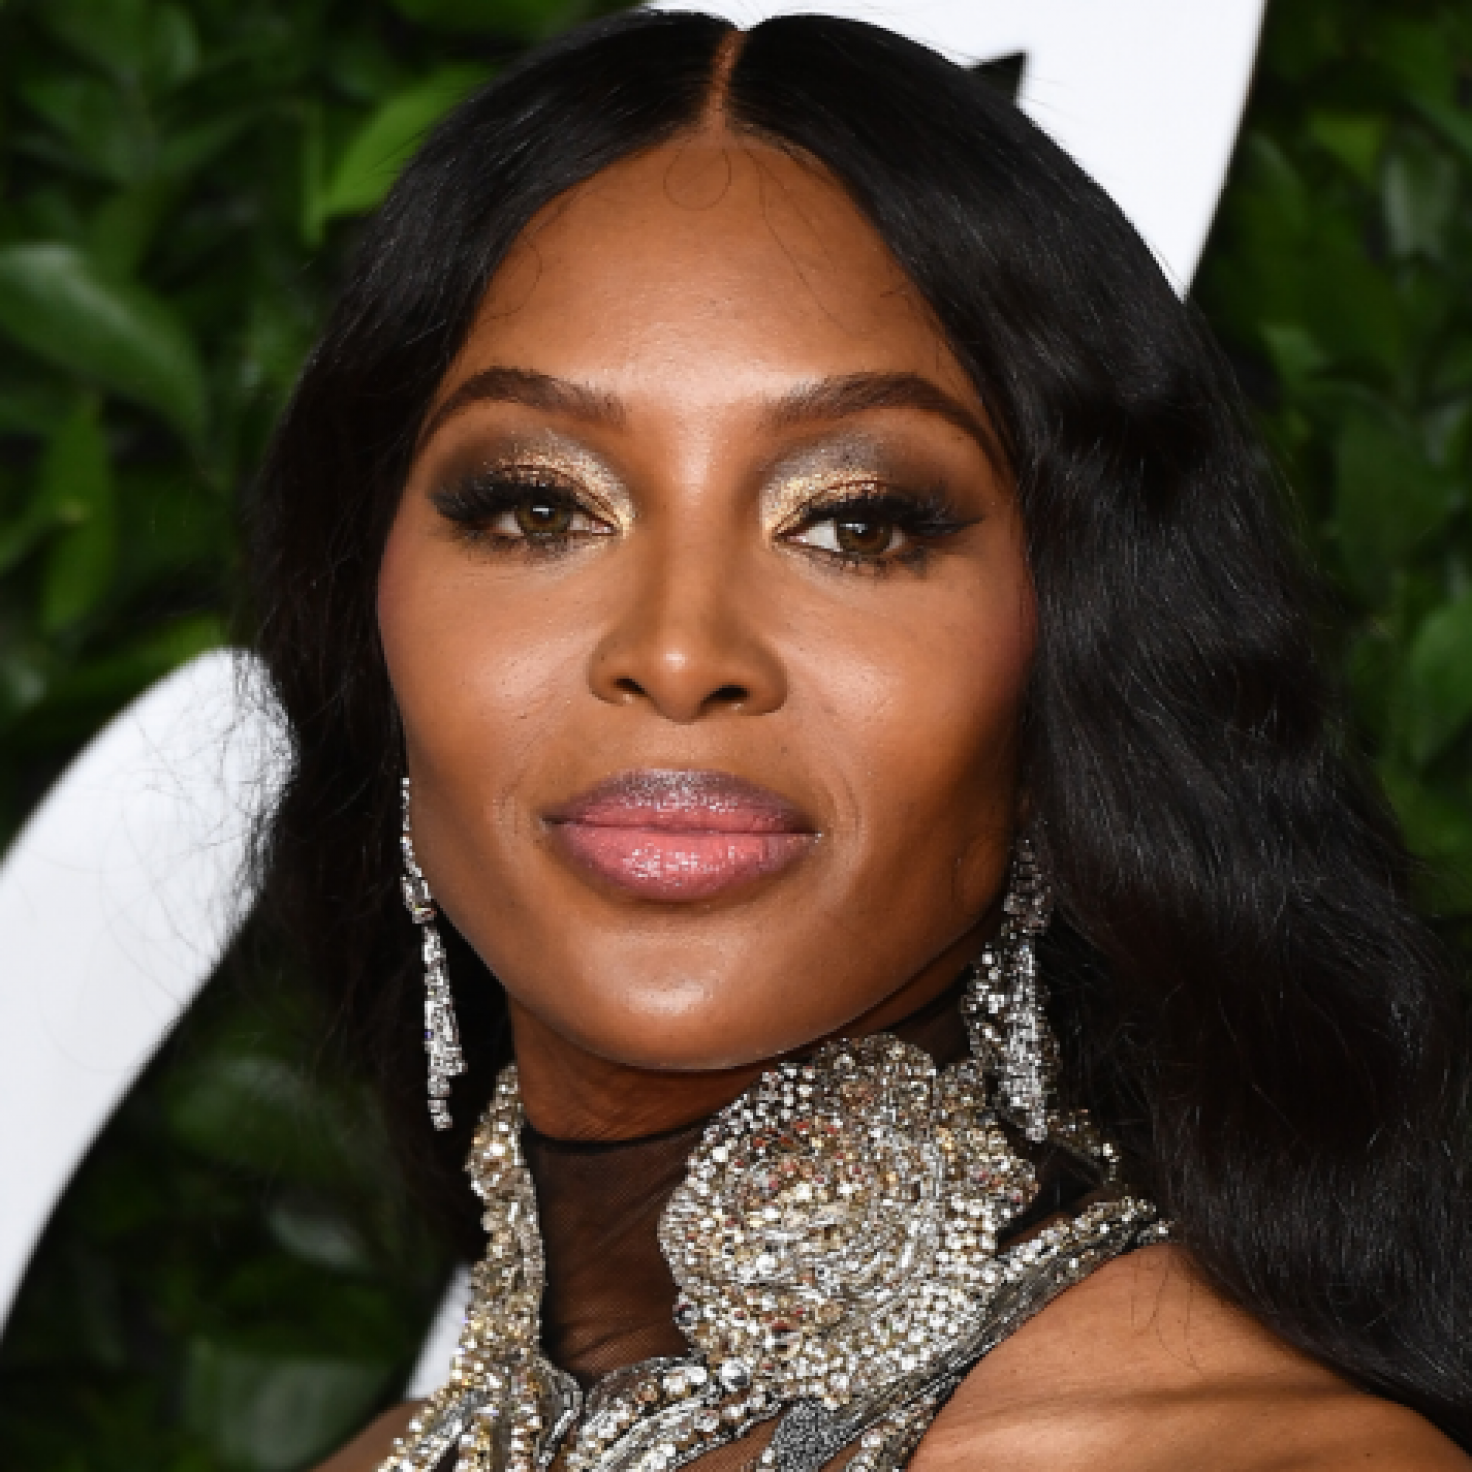 ICYMI: Naomi Campbell Has A New Hairstyle